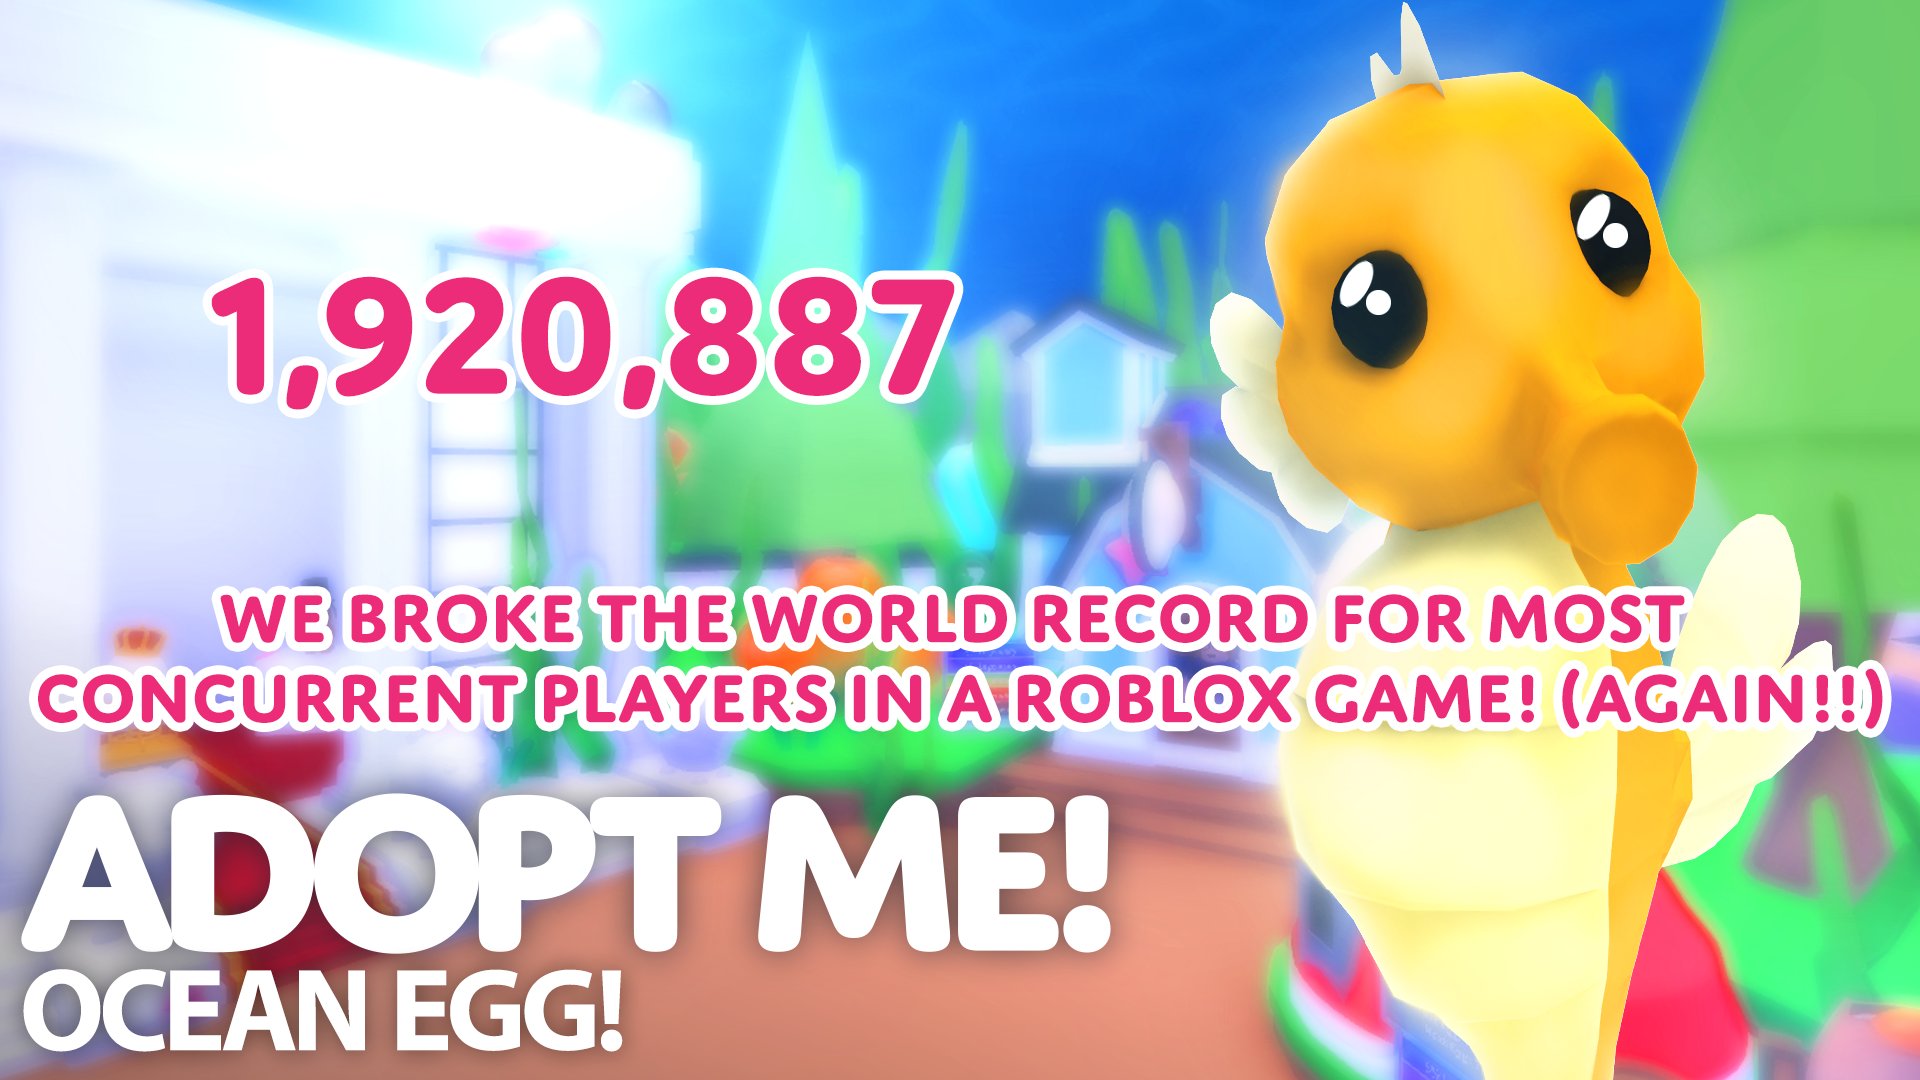 Adopt Me! on X: THE NEW WORLD RECORD FOR @ROBLOX CCU (PLAYERS ACTIVE) IS  1,615 MILLION PLAYERS!! 🎉🎉 Thank you so much for tuning in to see the  live event, and apologies